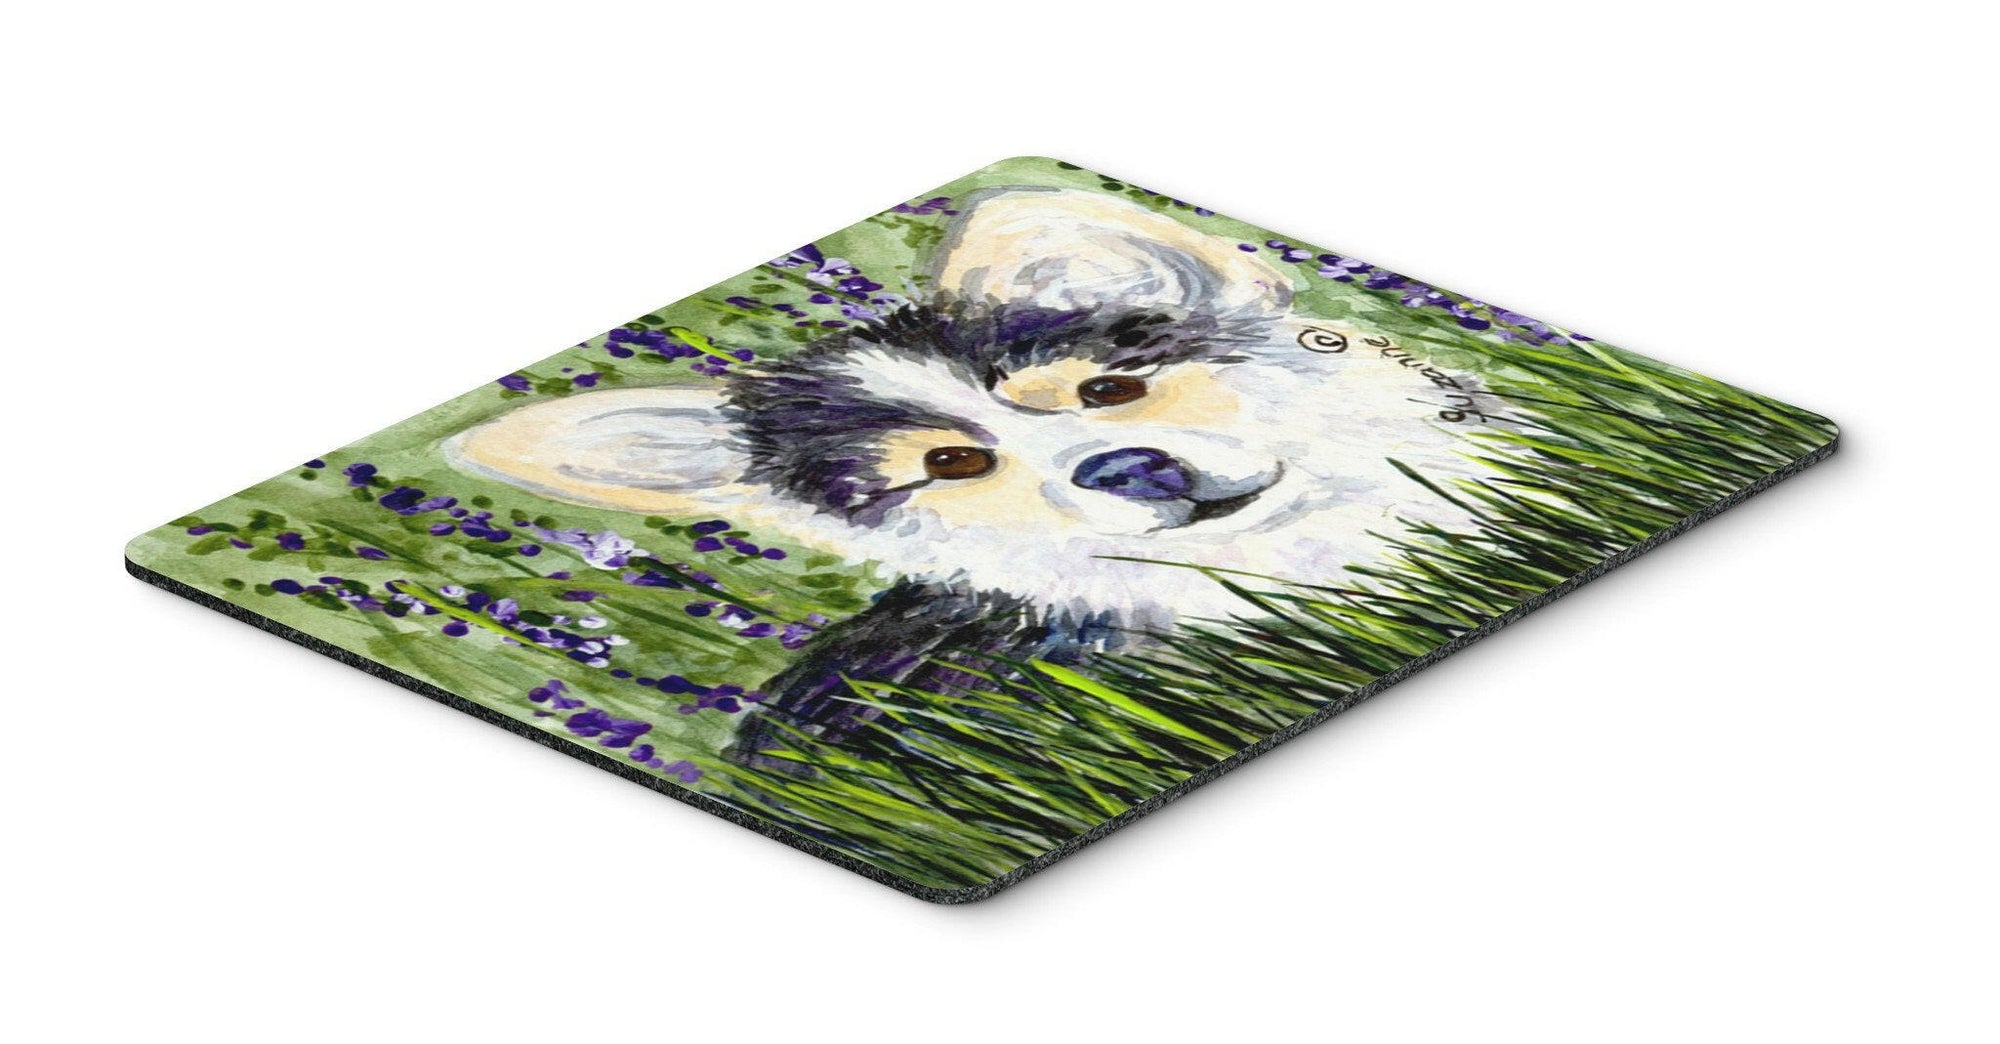 Chihuahua Mouse pad, hot pad, or trivet by Caroline's Treasures